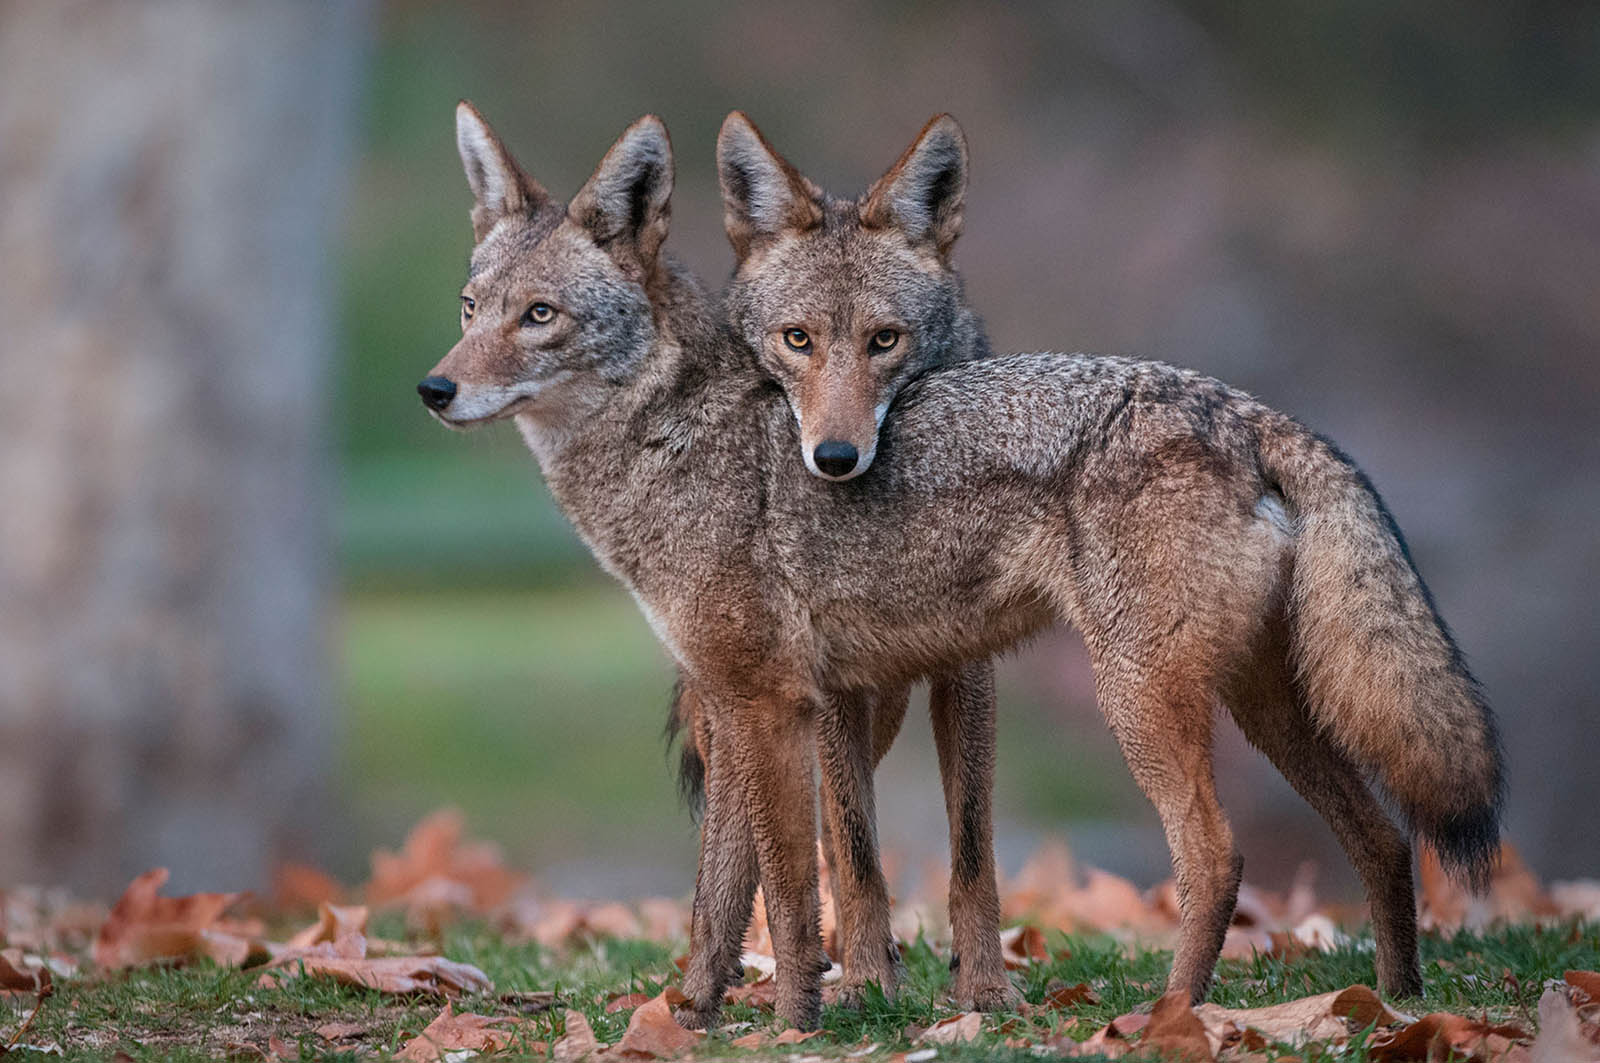 Passing This General Knowledge Quiz Means You Know a Lot About Everything Coyotes